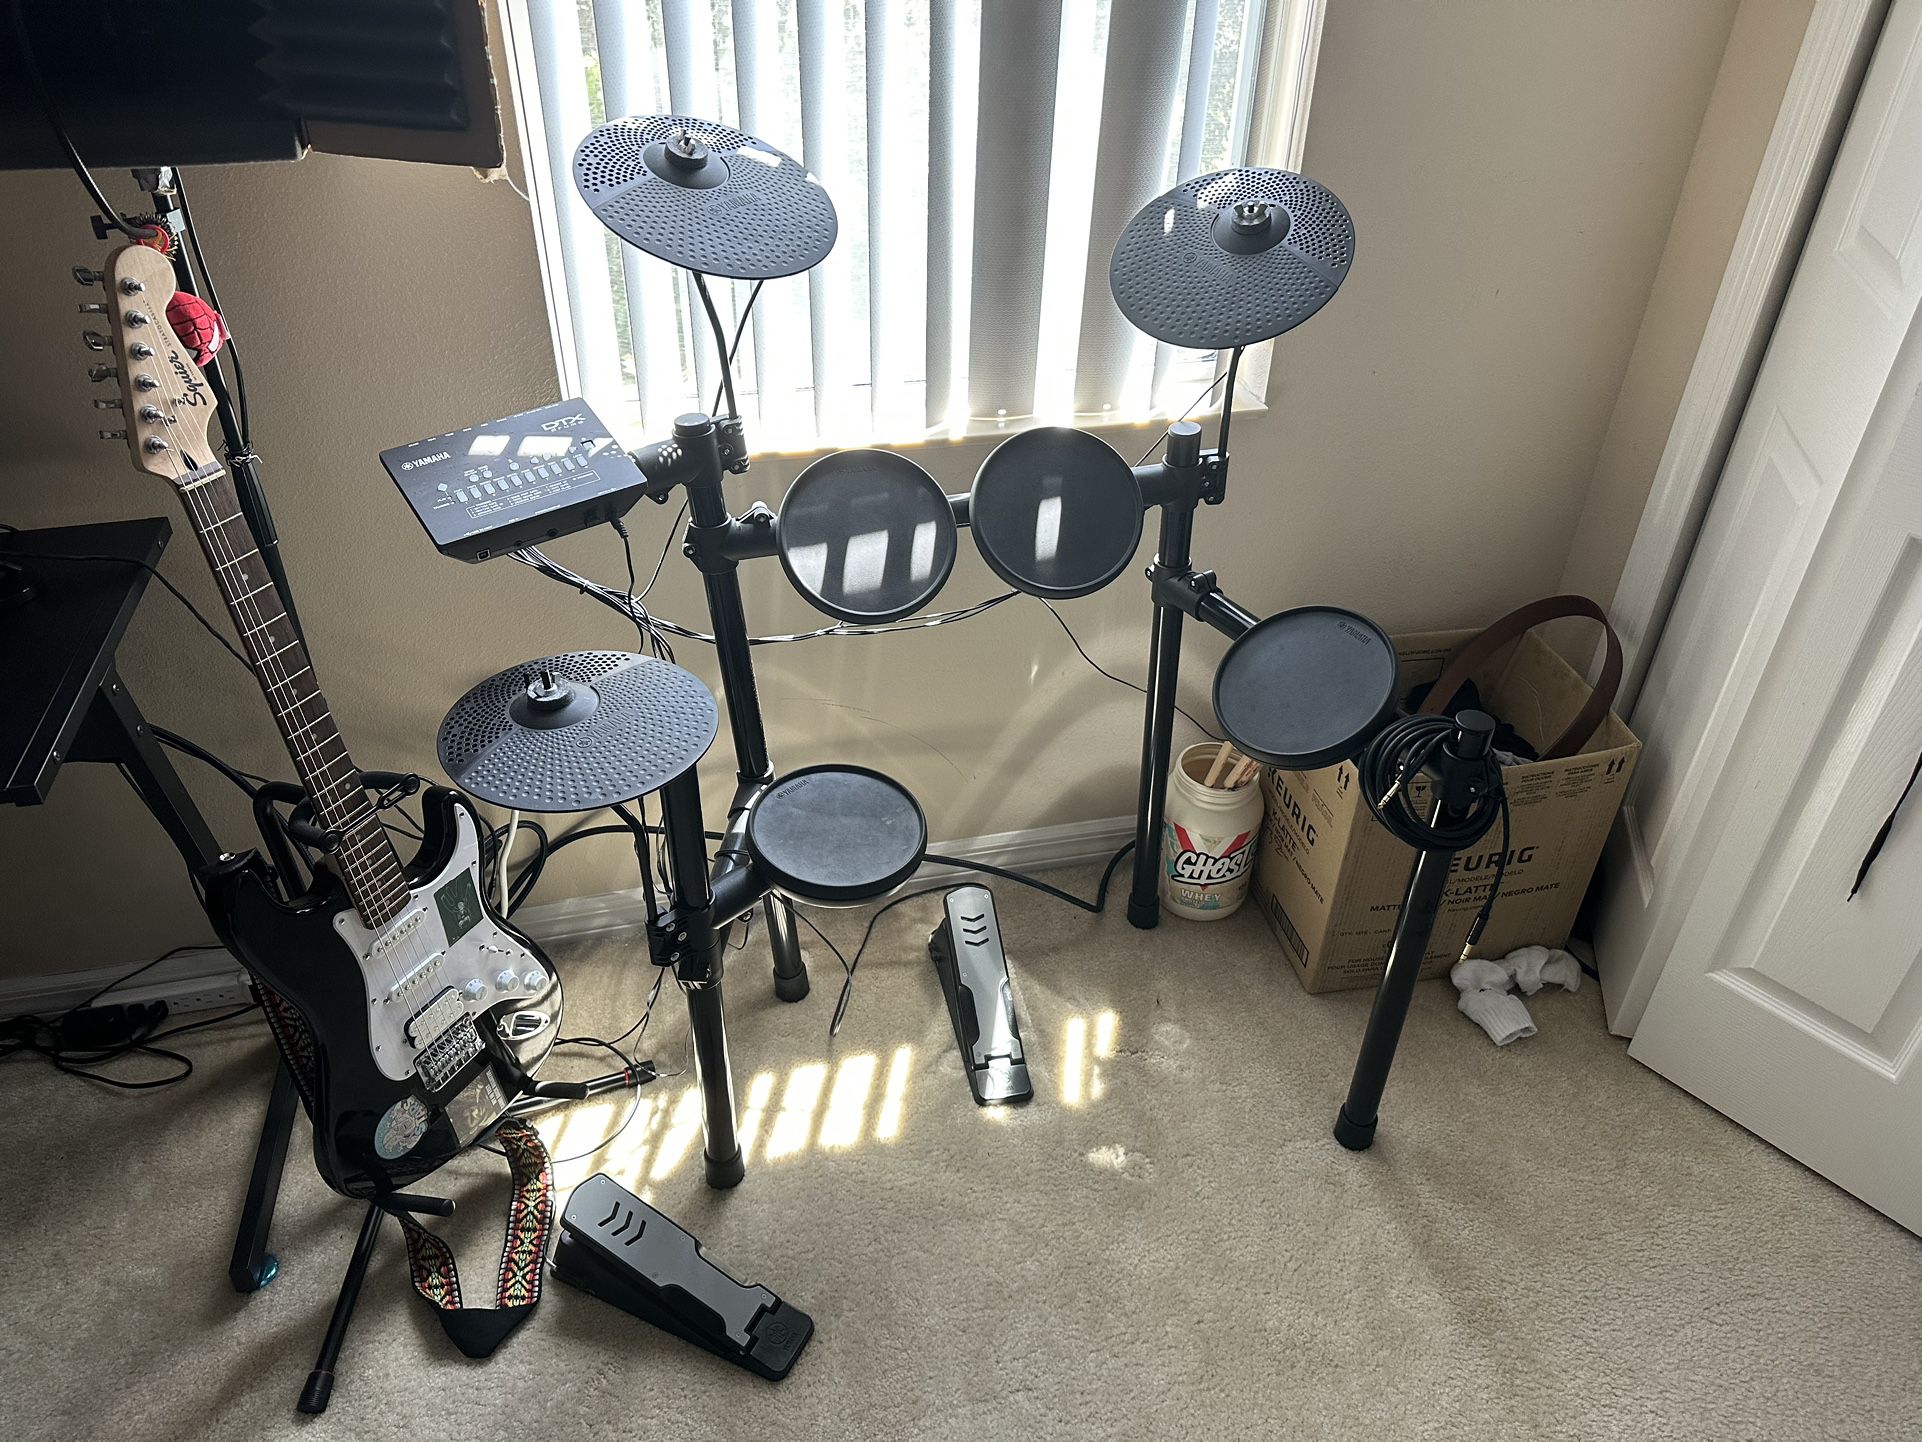 Yamaha DTX402k Electronic Drumset for Sale in Ocoee, FL - OfferUp